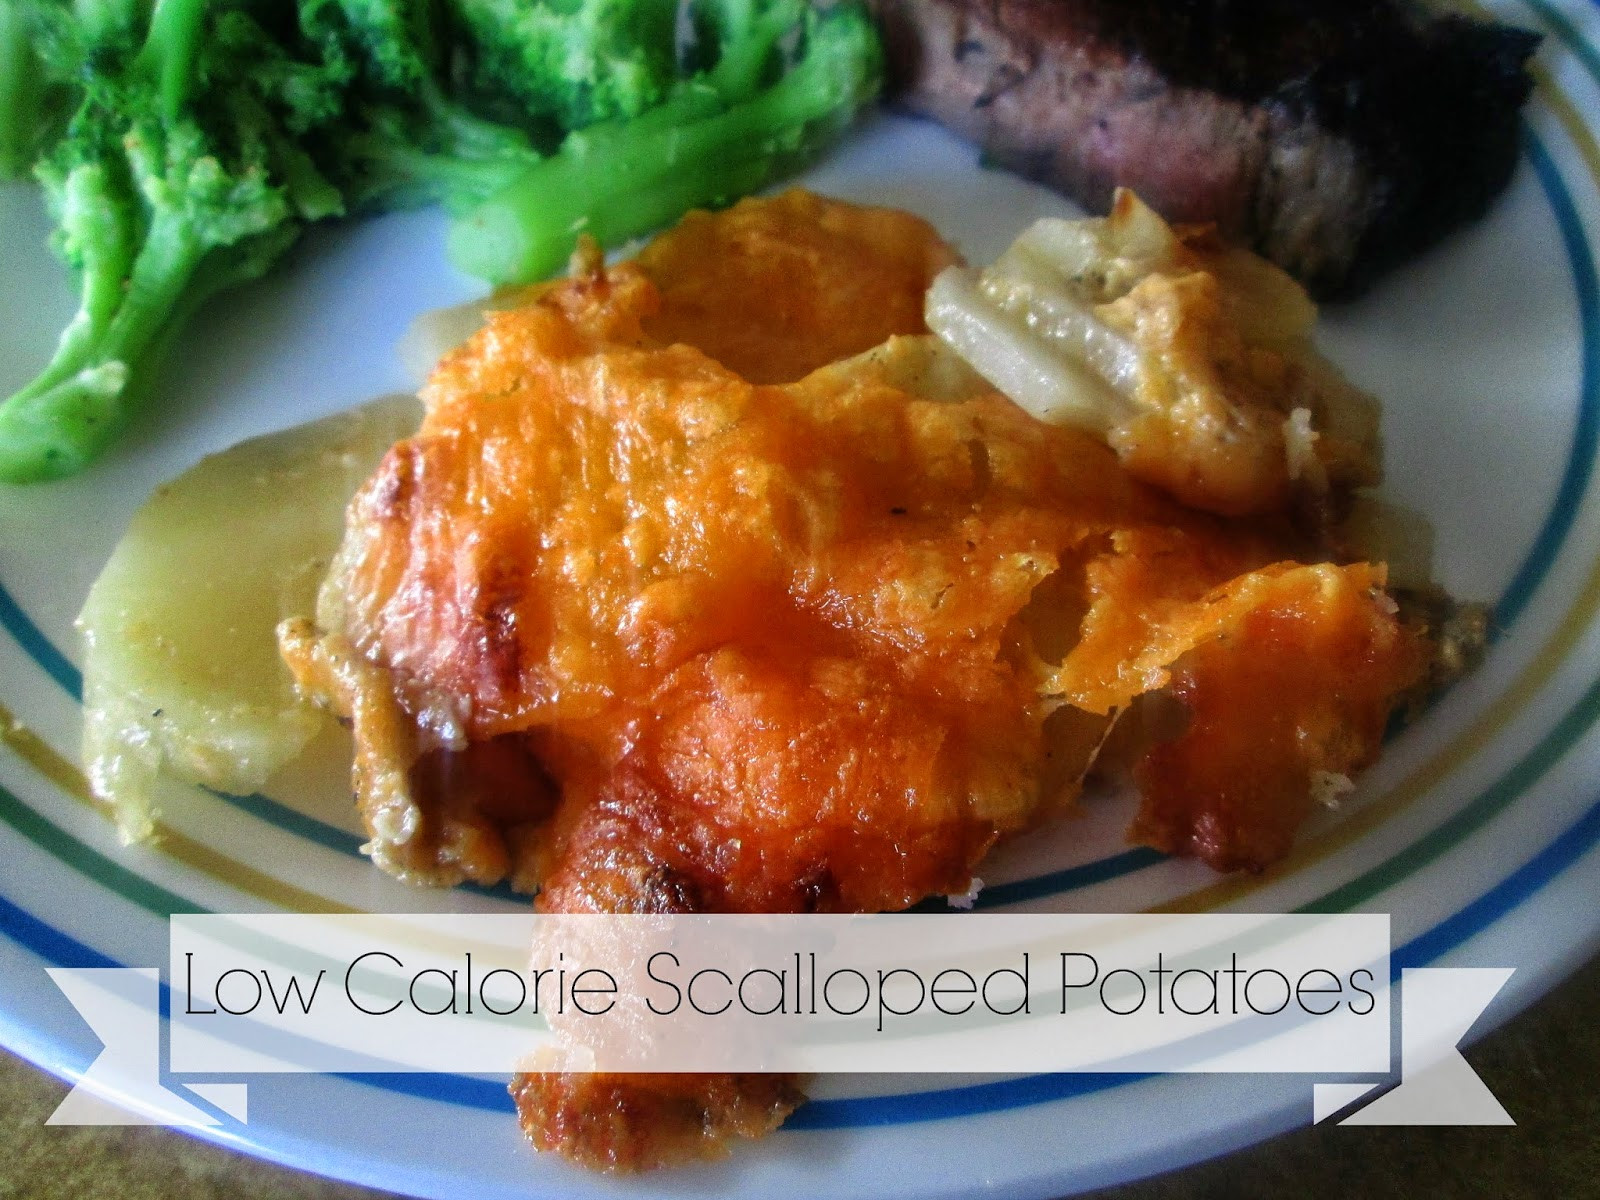 Low Calorie Scalloped Potatoes
 THE REHOMESTEADERS Low Calorie Scalloped Potatoes